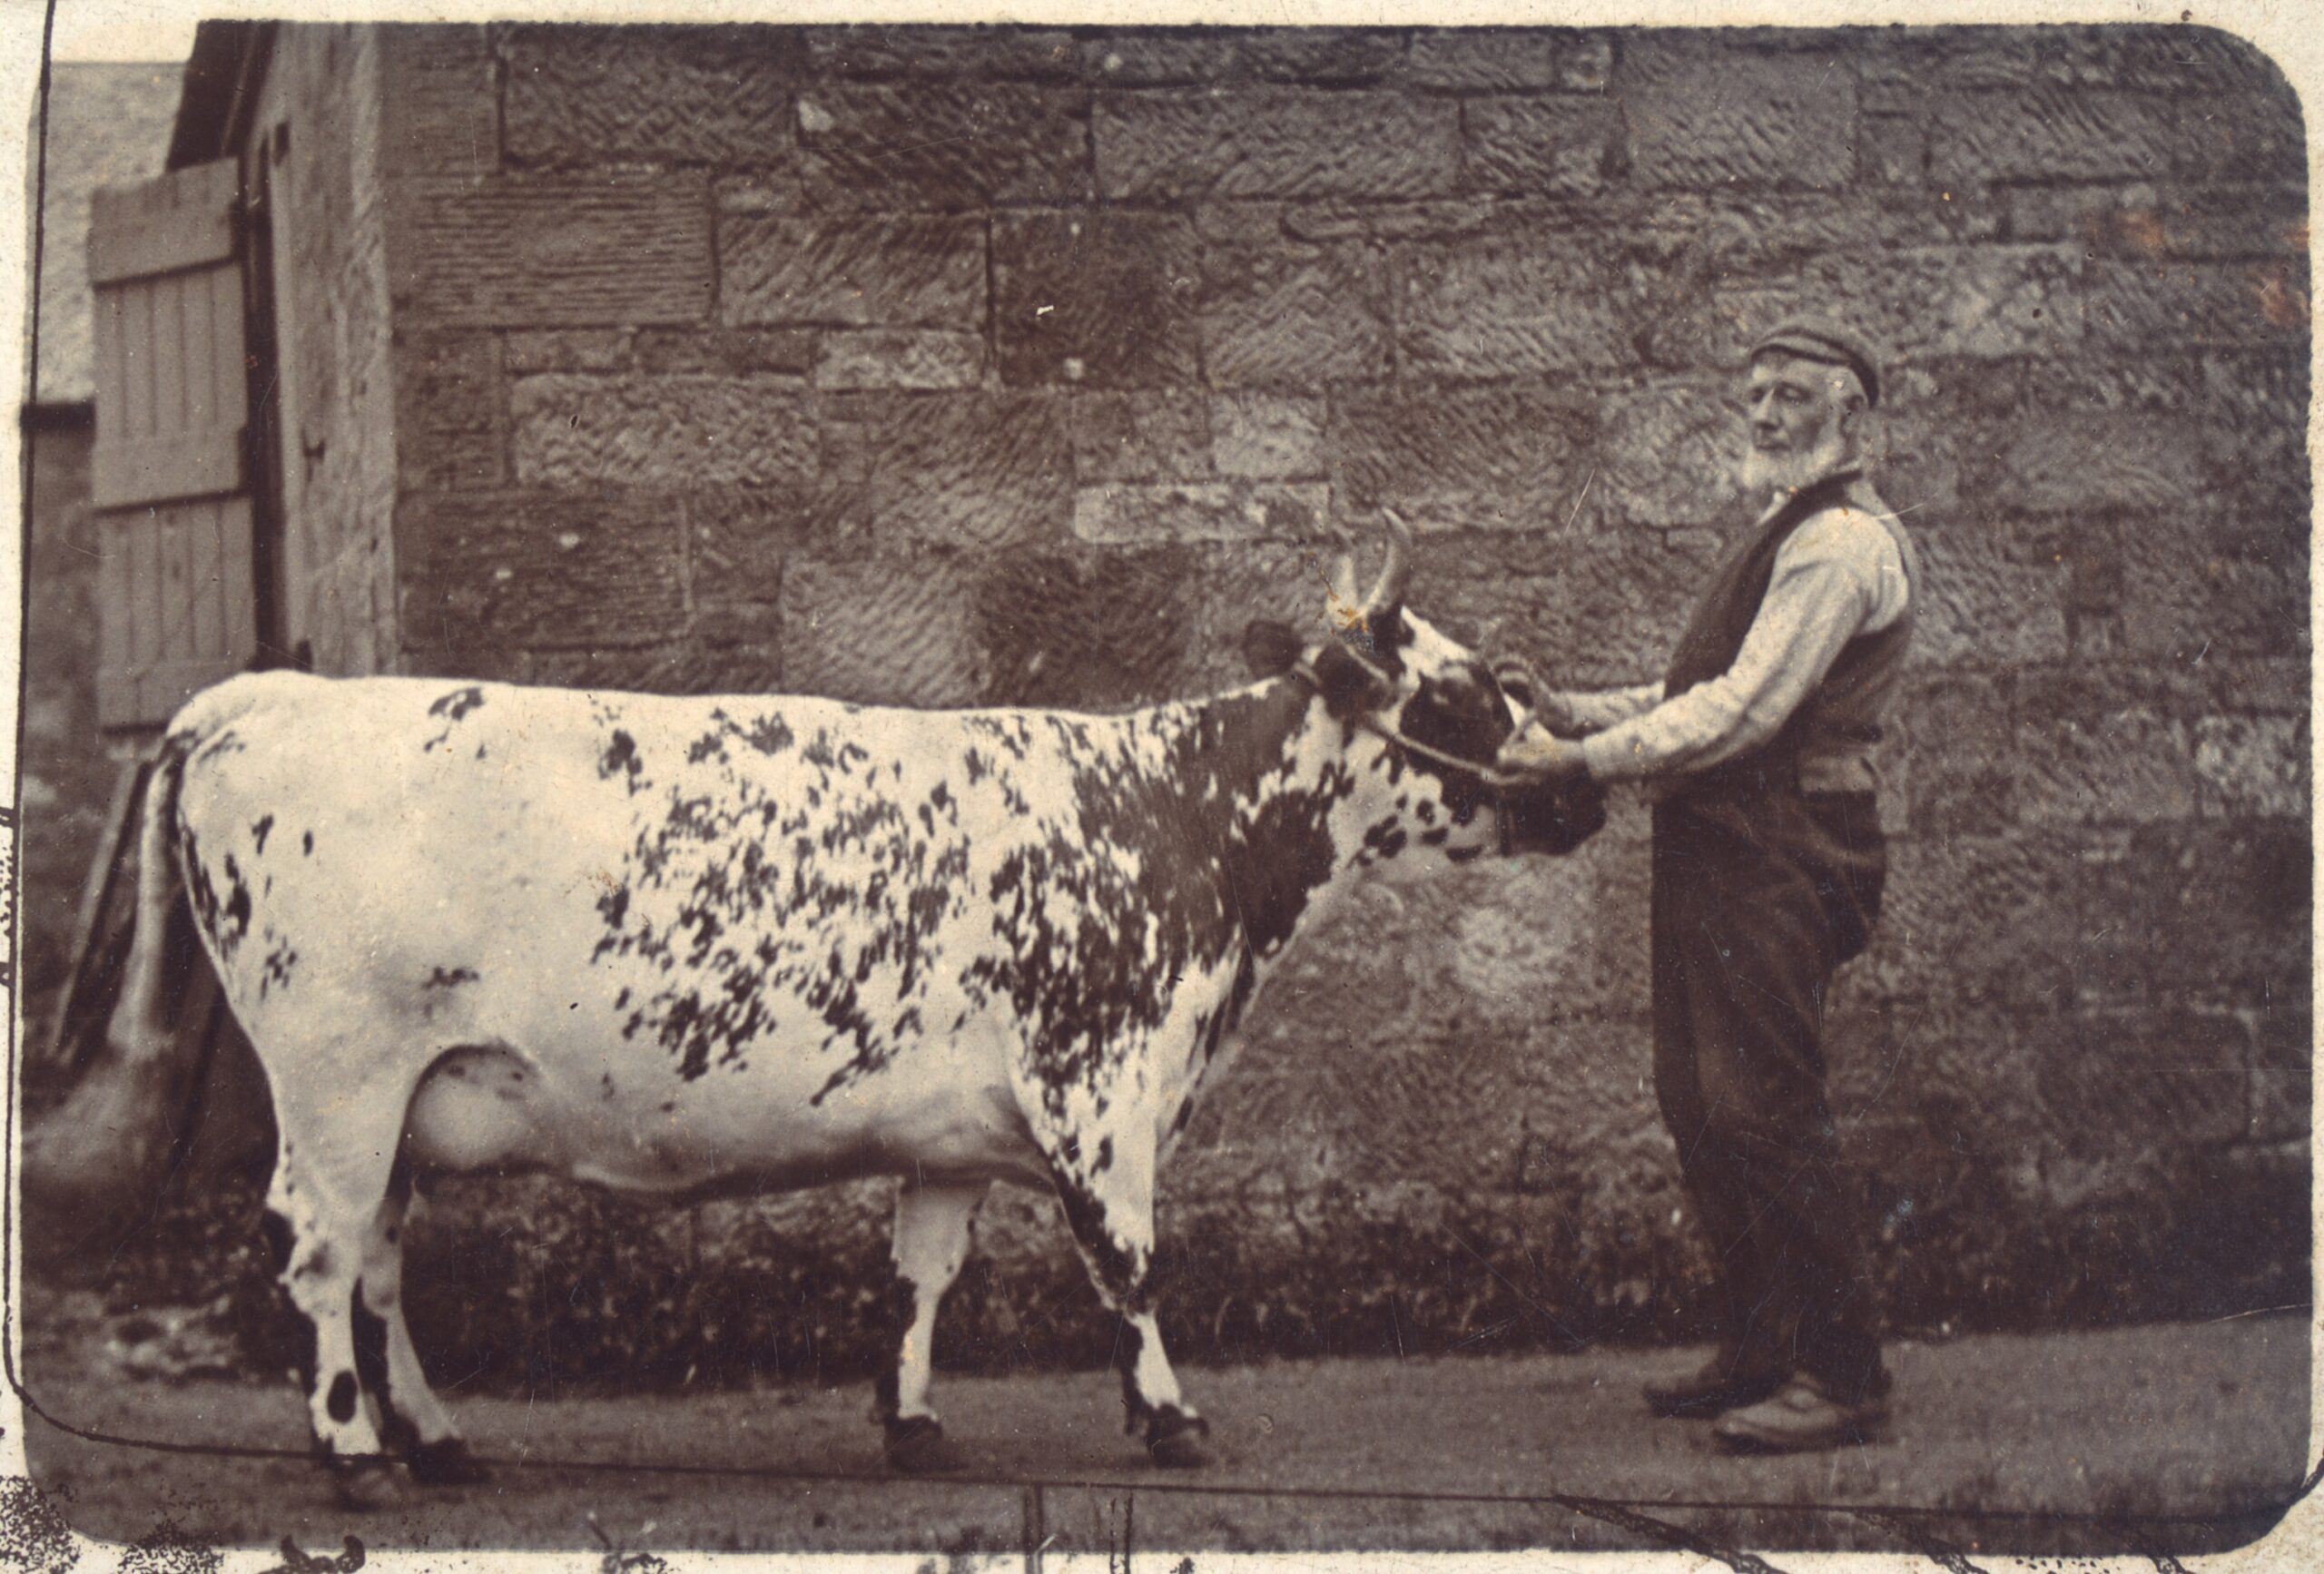 A black and white archive photo showing and old man and a big cow.